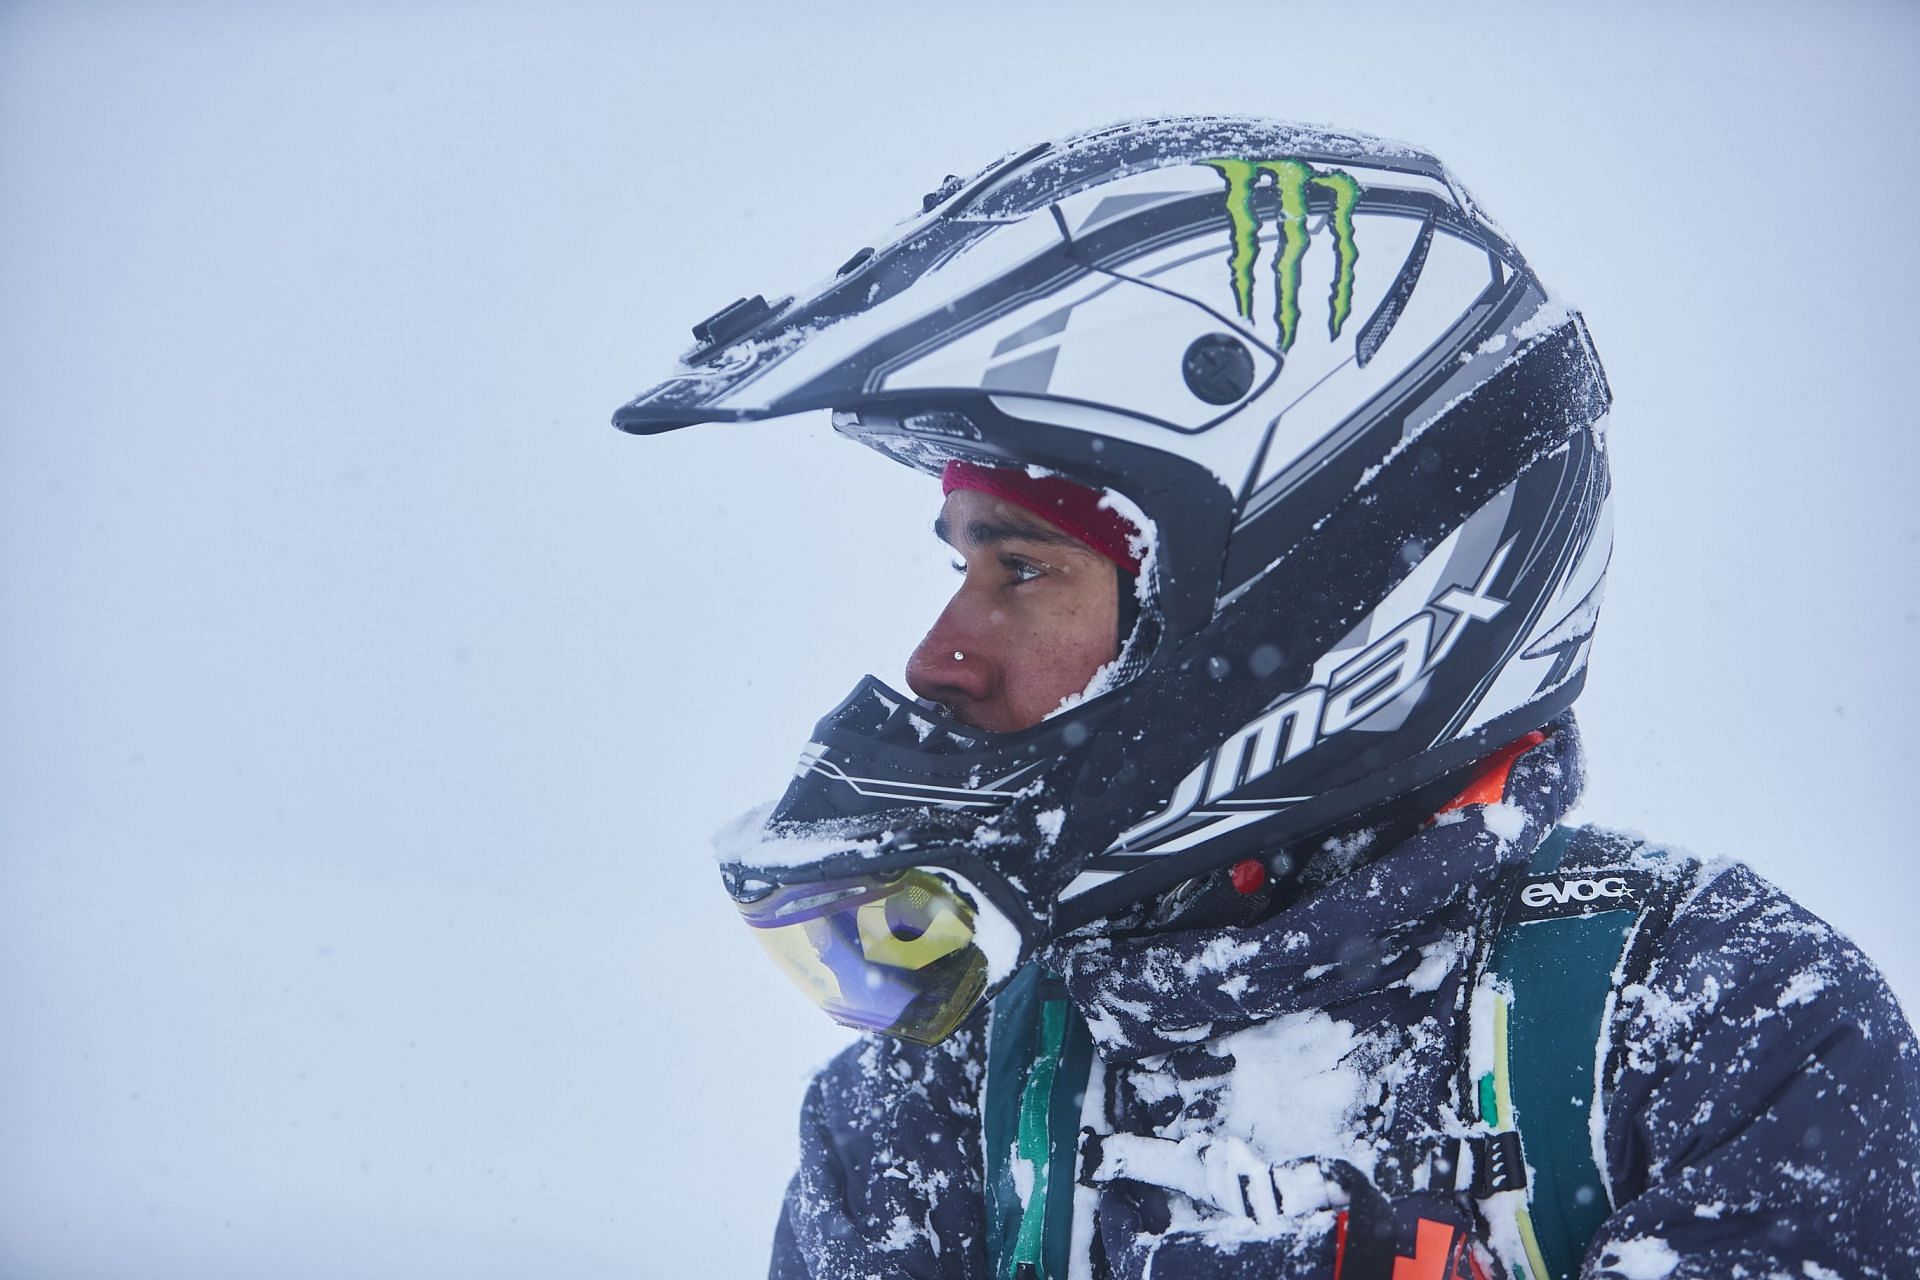 In this handout image provided by Monster Energy, four-time F1 world champion Lewis Hamilton rides a snow bike in  Japan (Photo by Nathan Gallagher/Monster Energy via Getty Images)